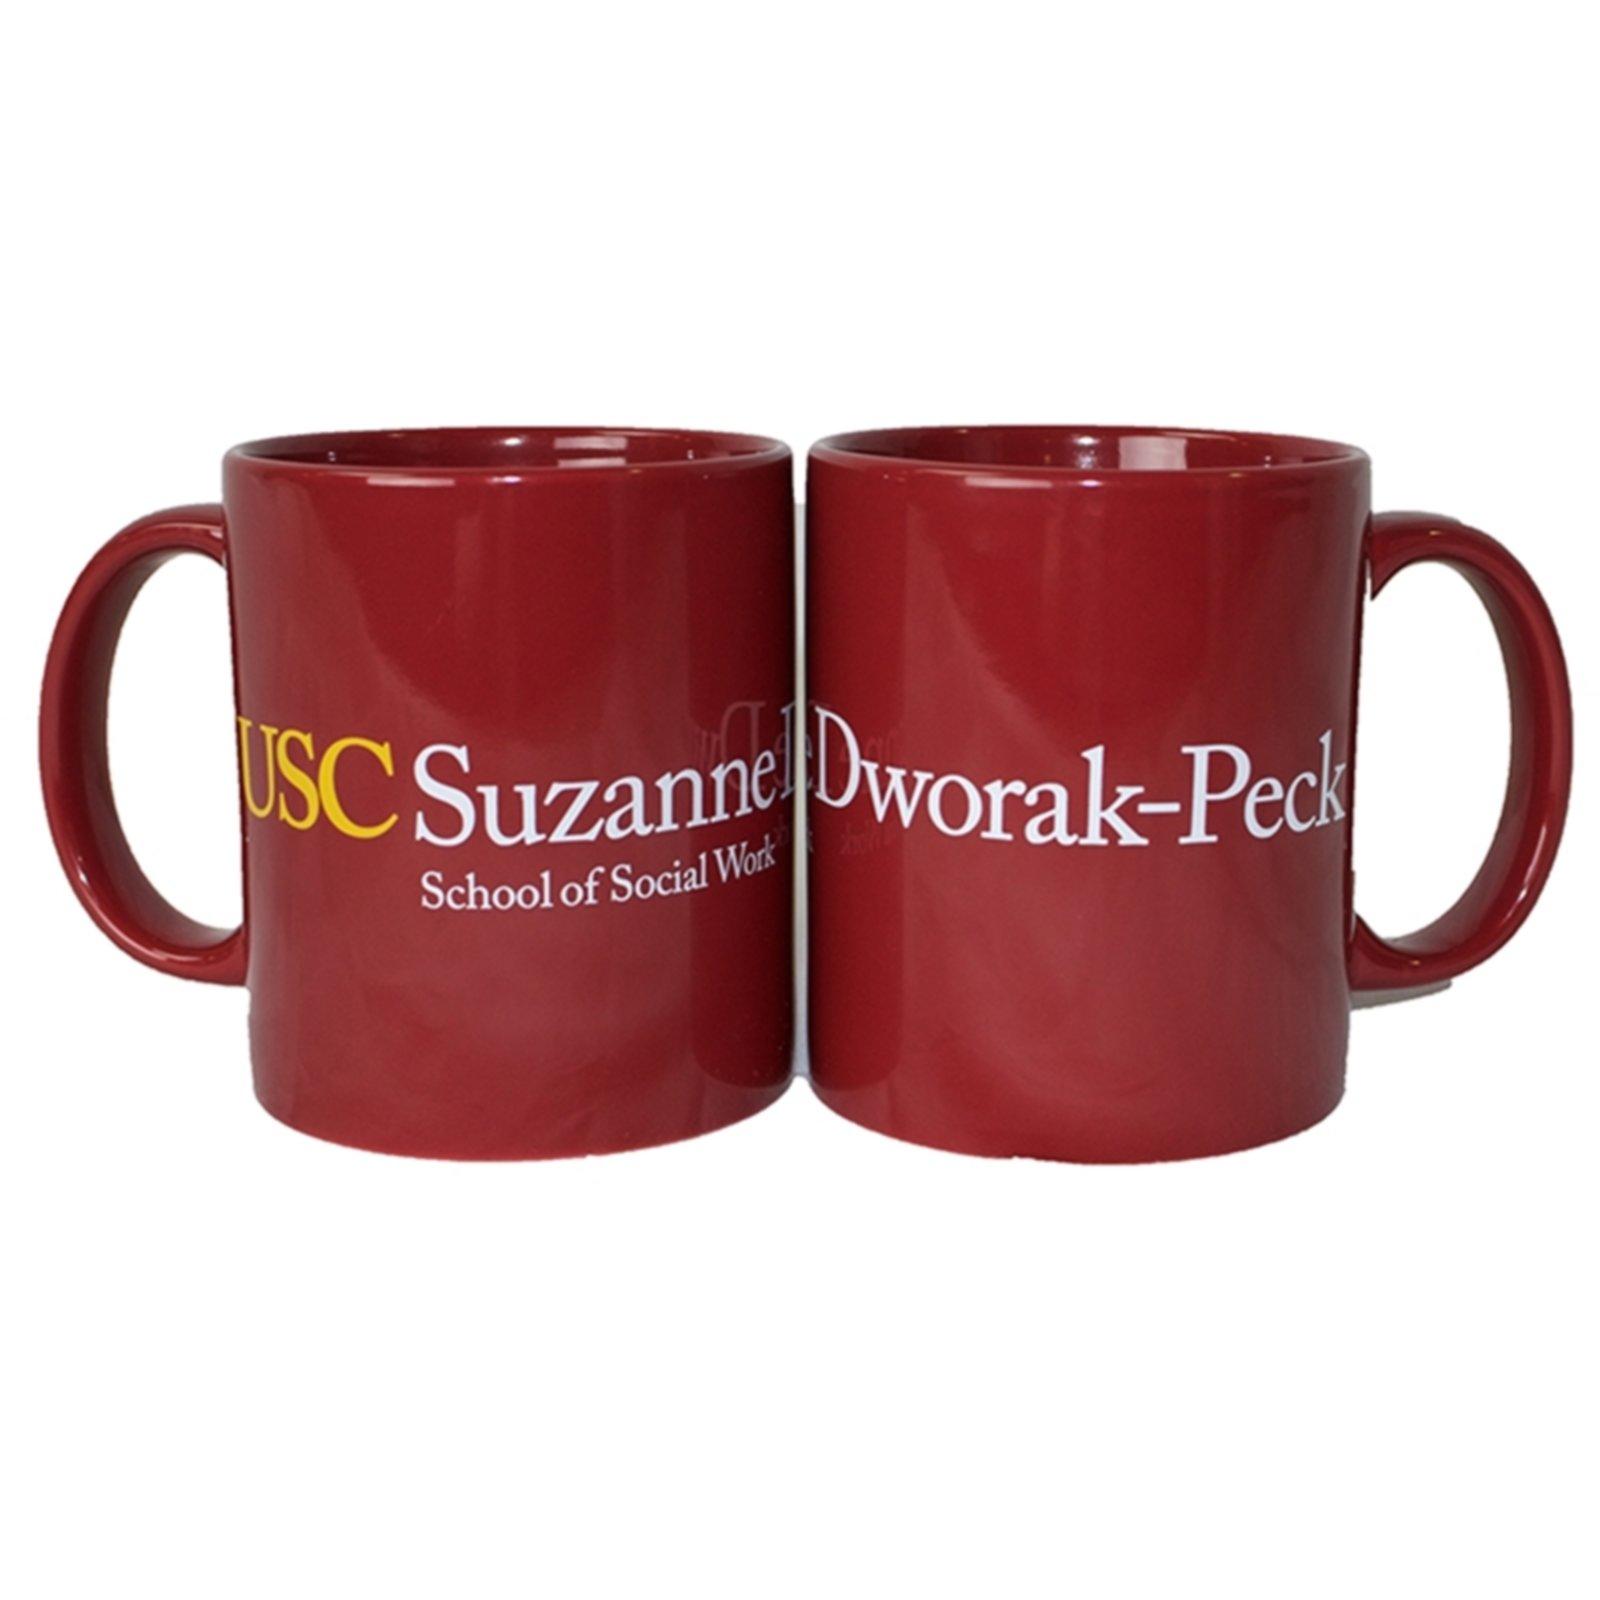 USC Suzanne Dworak-Peck School Of Social Work Coffee Mug By R&D Specialty Company image01